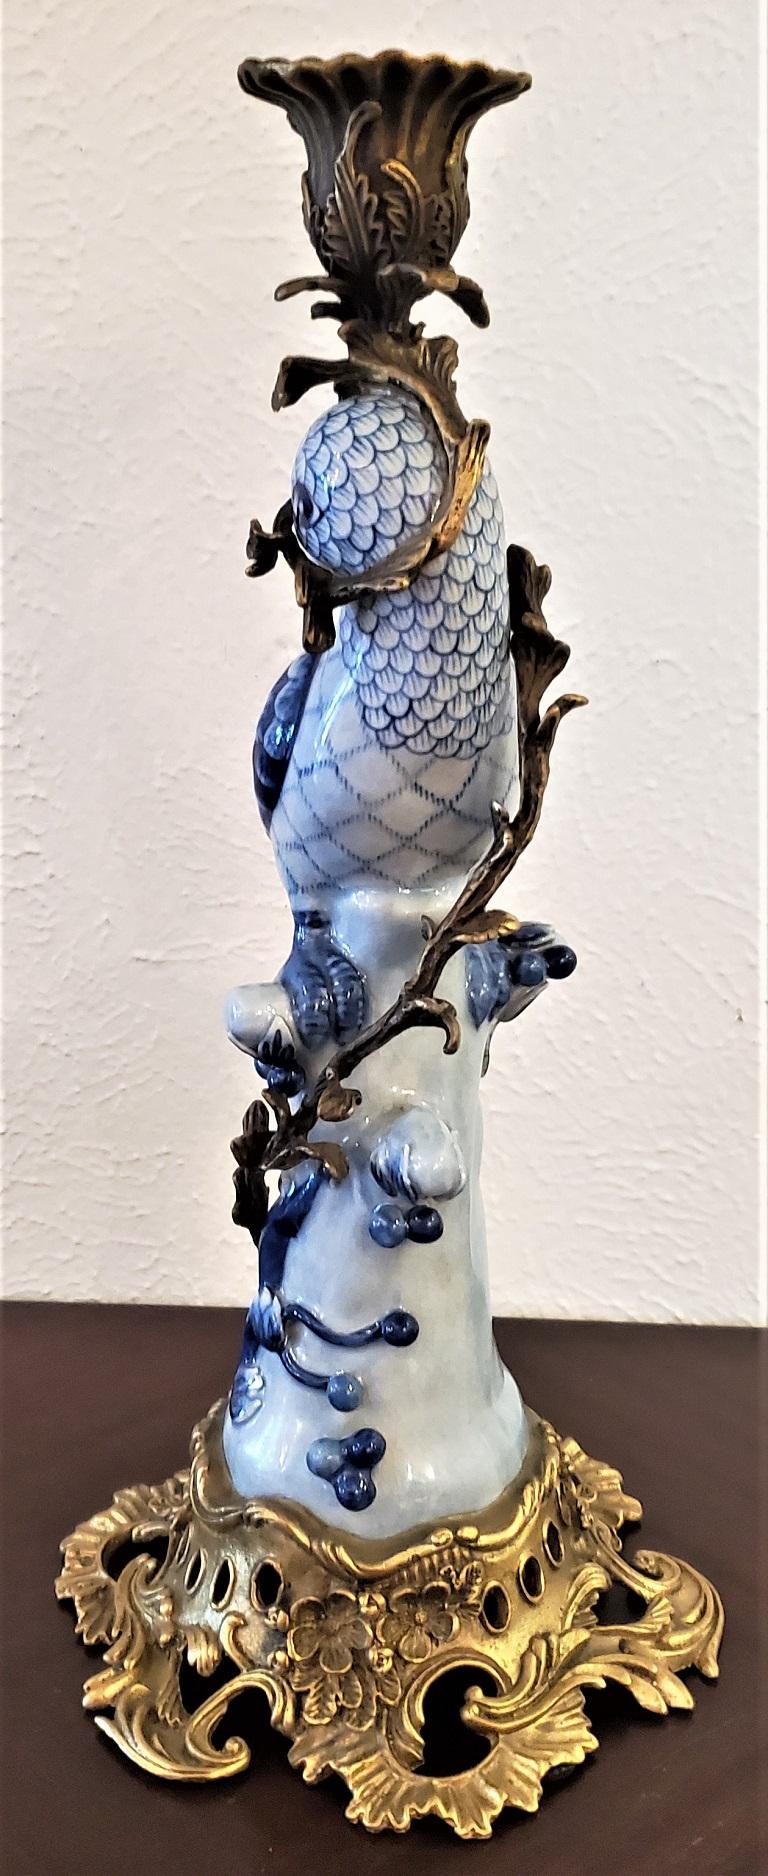 The candelabra or candlestick is made of bronze ormolu wrapped around a hand painted blue and white porcelain parrot.

Holds a single candle.

Very French Art Nouveau in style but we are of the belief that this was most likely made in China in